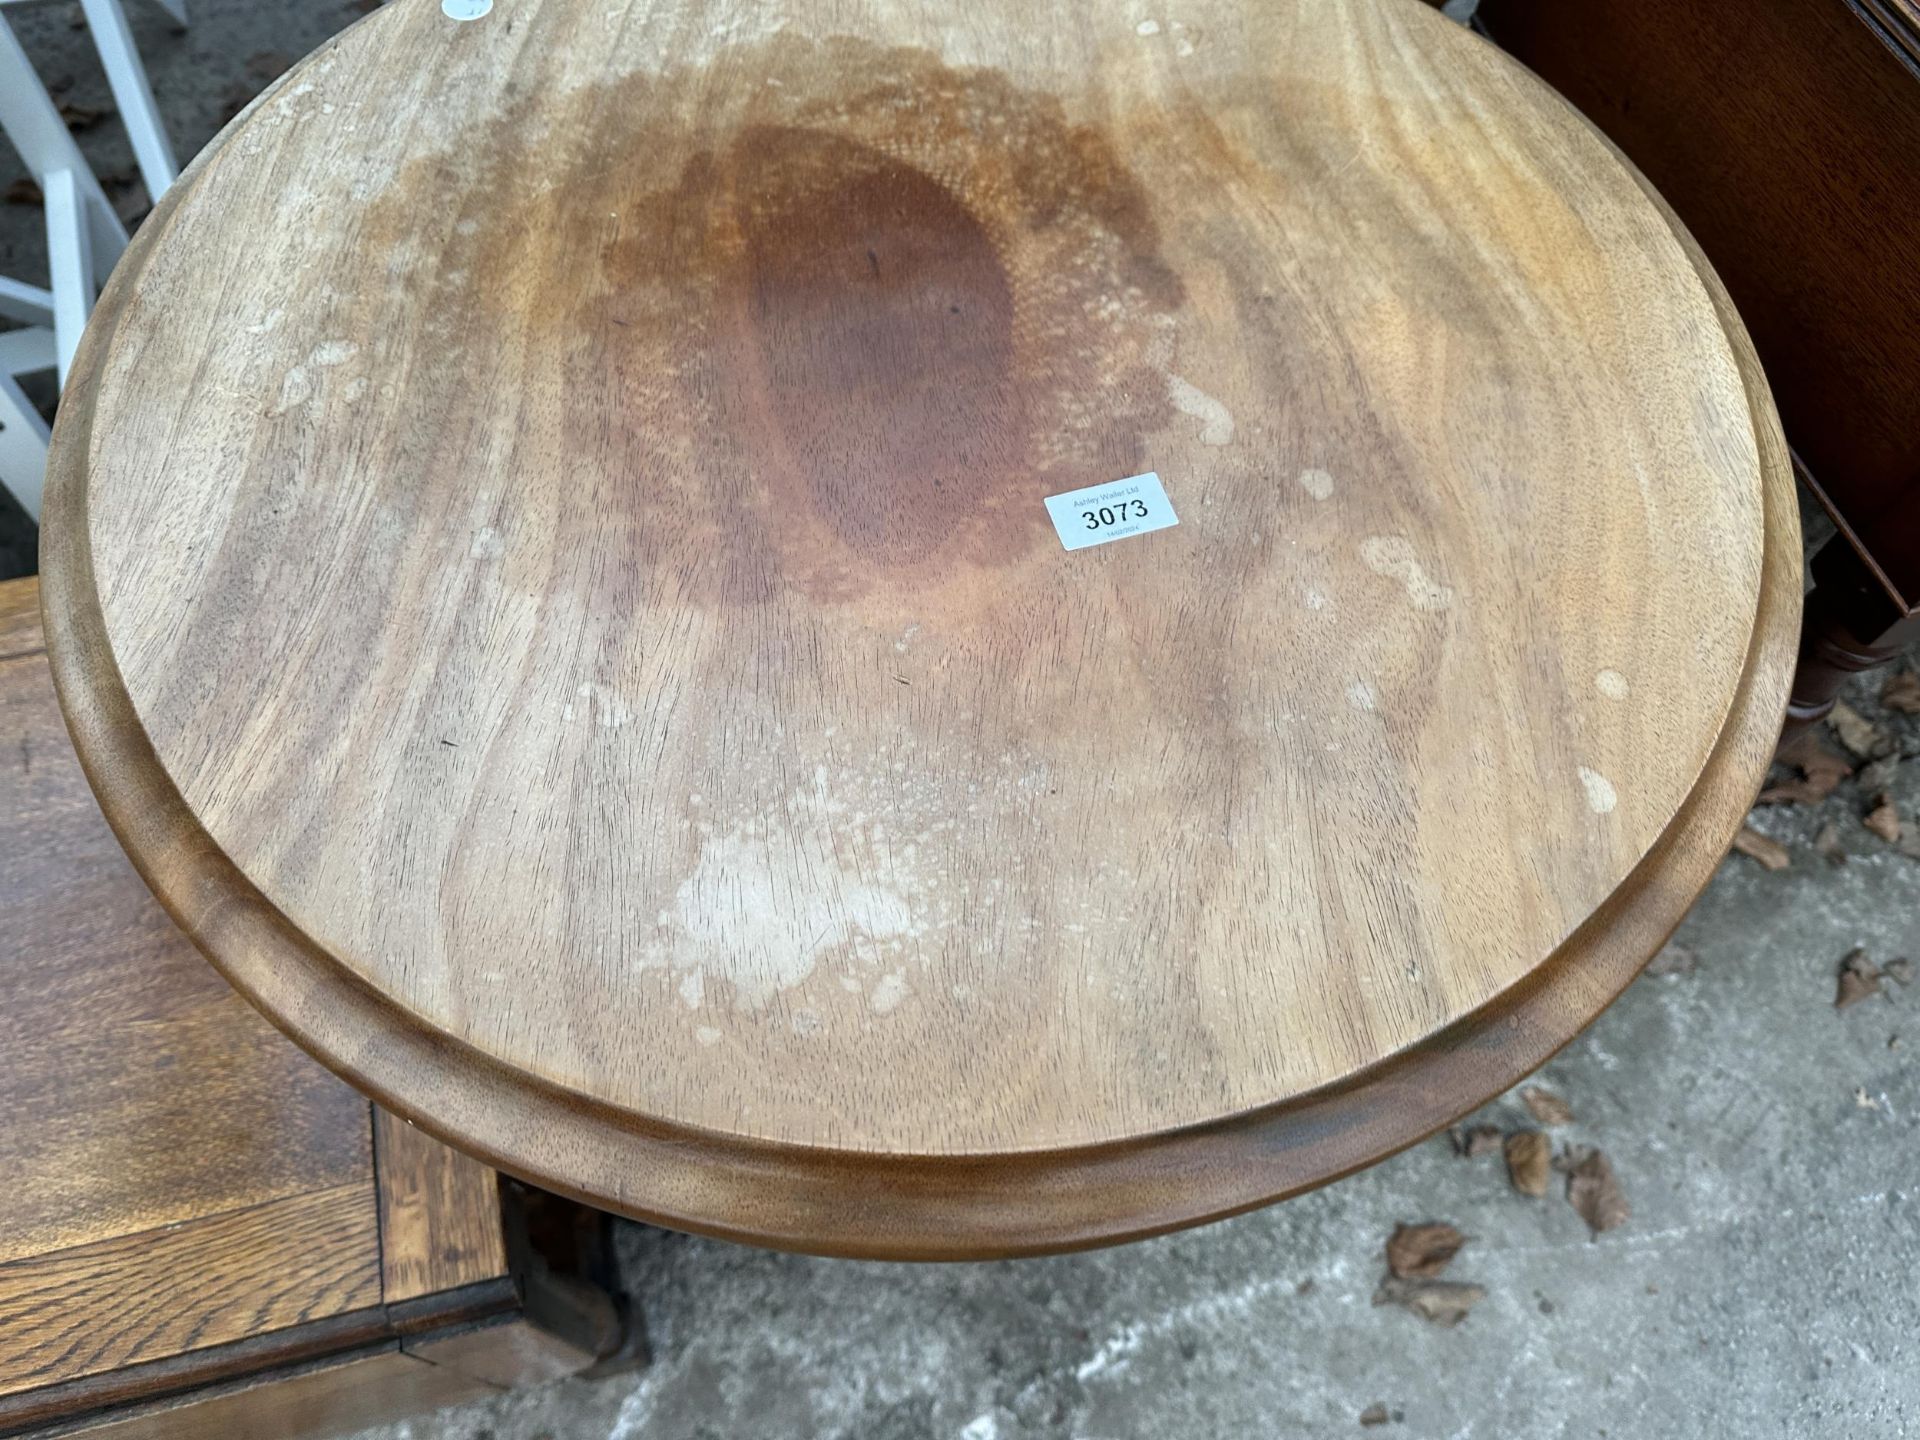 A 23" DIAMETER PUB TABLE ON CAST IRON BASE - Image 2 of 3